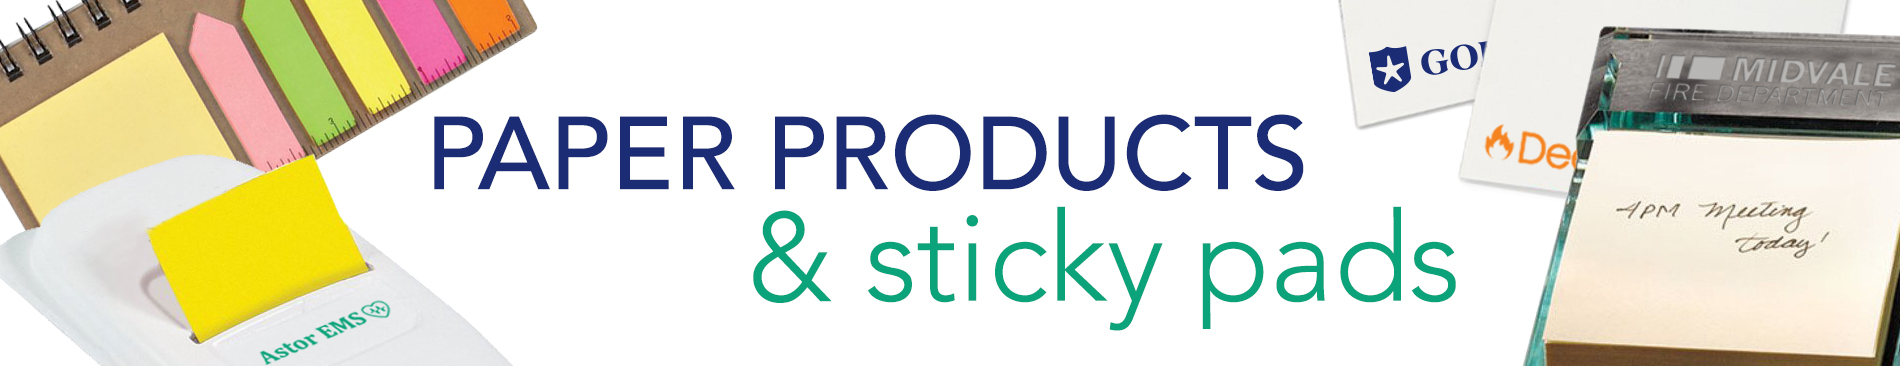 paper products and sticky pads